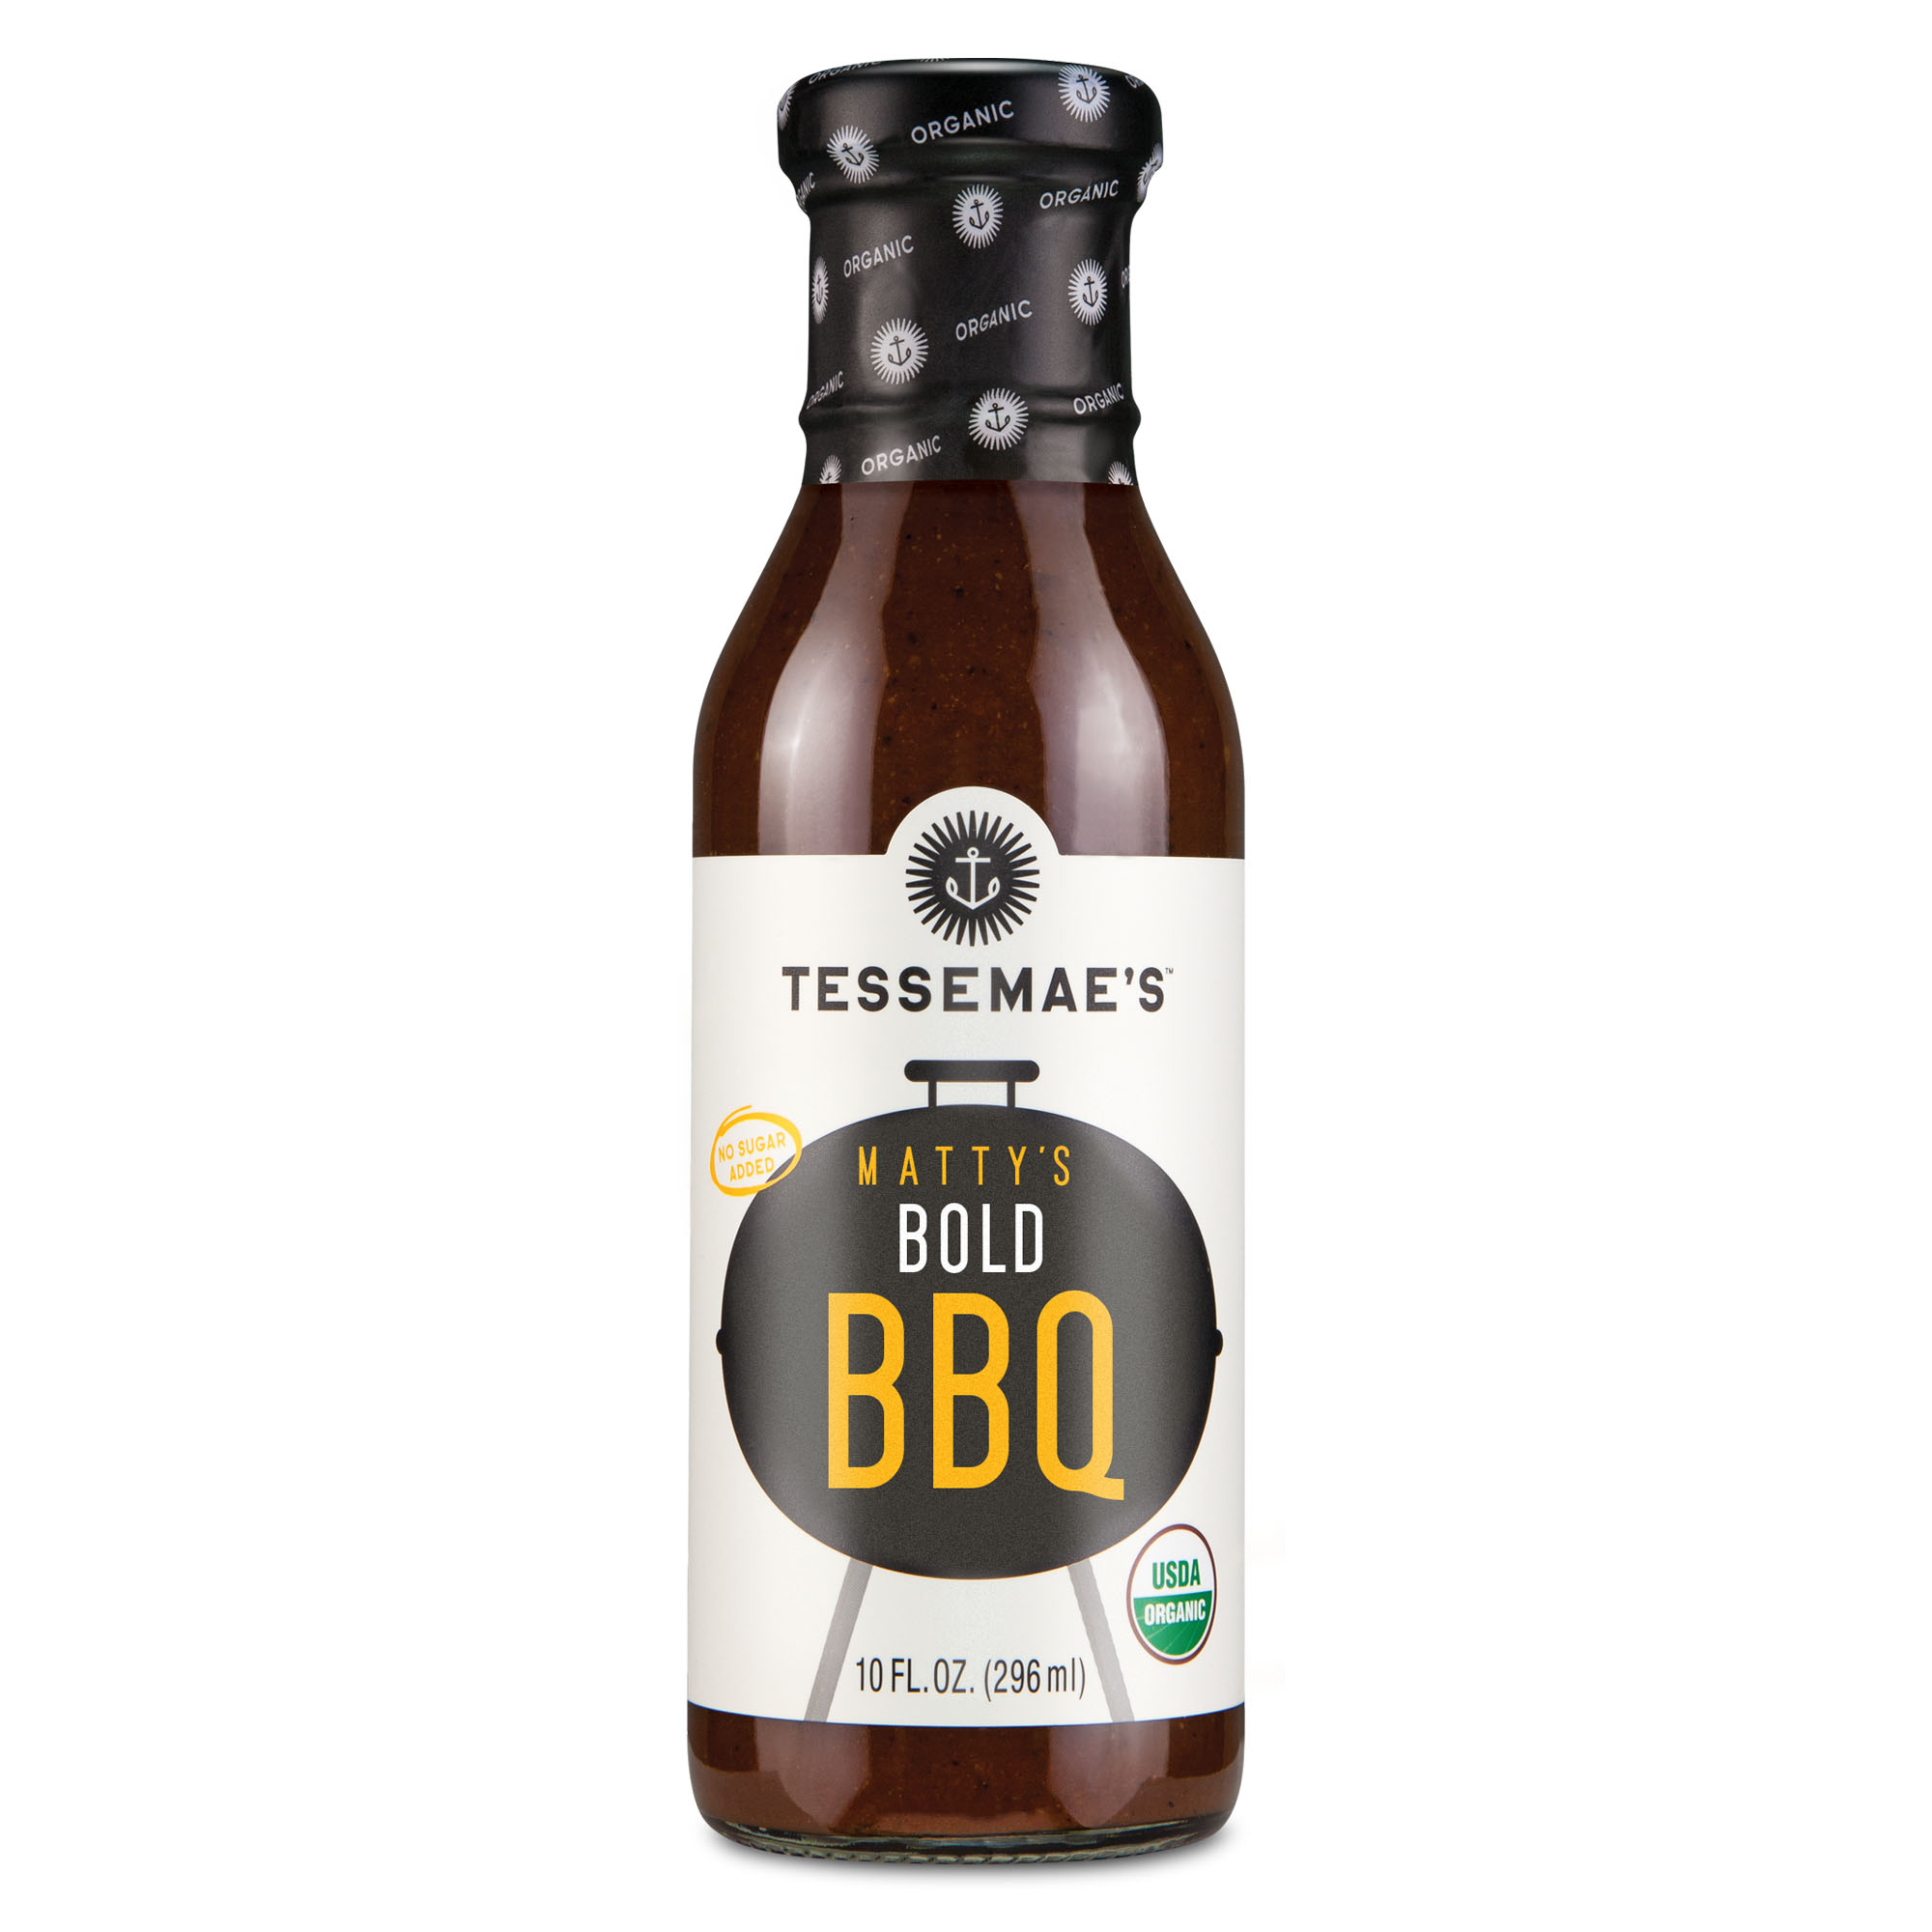 Tessemae's Organic Bold BBQ Sauce, 10 fl oz, No Sugar Added, Vegan, Dairy Free, Whole 30 Approved, Keto Friendly, Gluten Free Barbecue Sauce - image 1 of 6